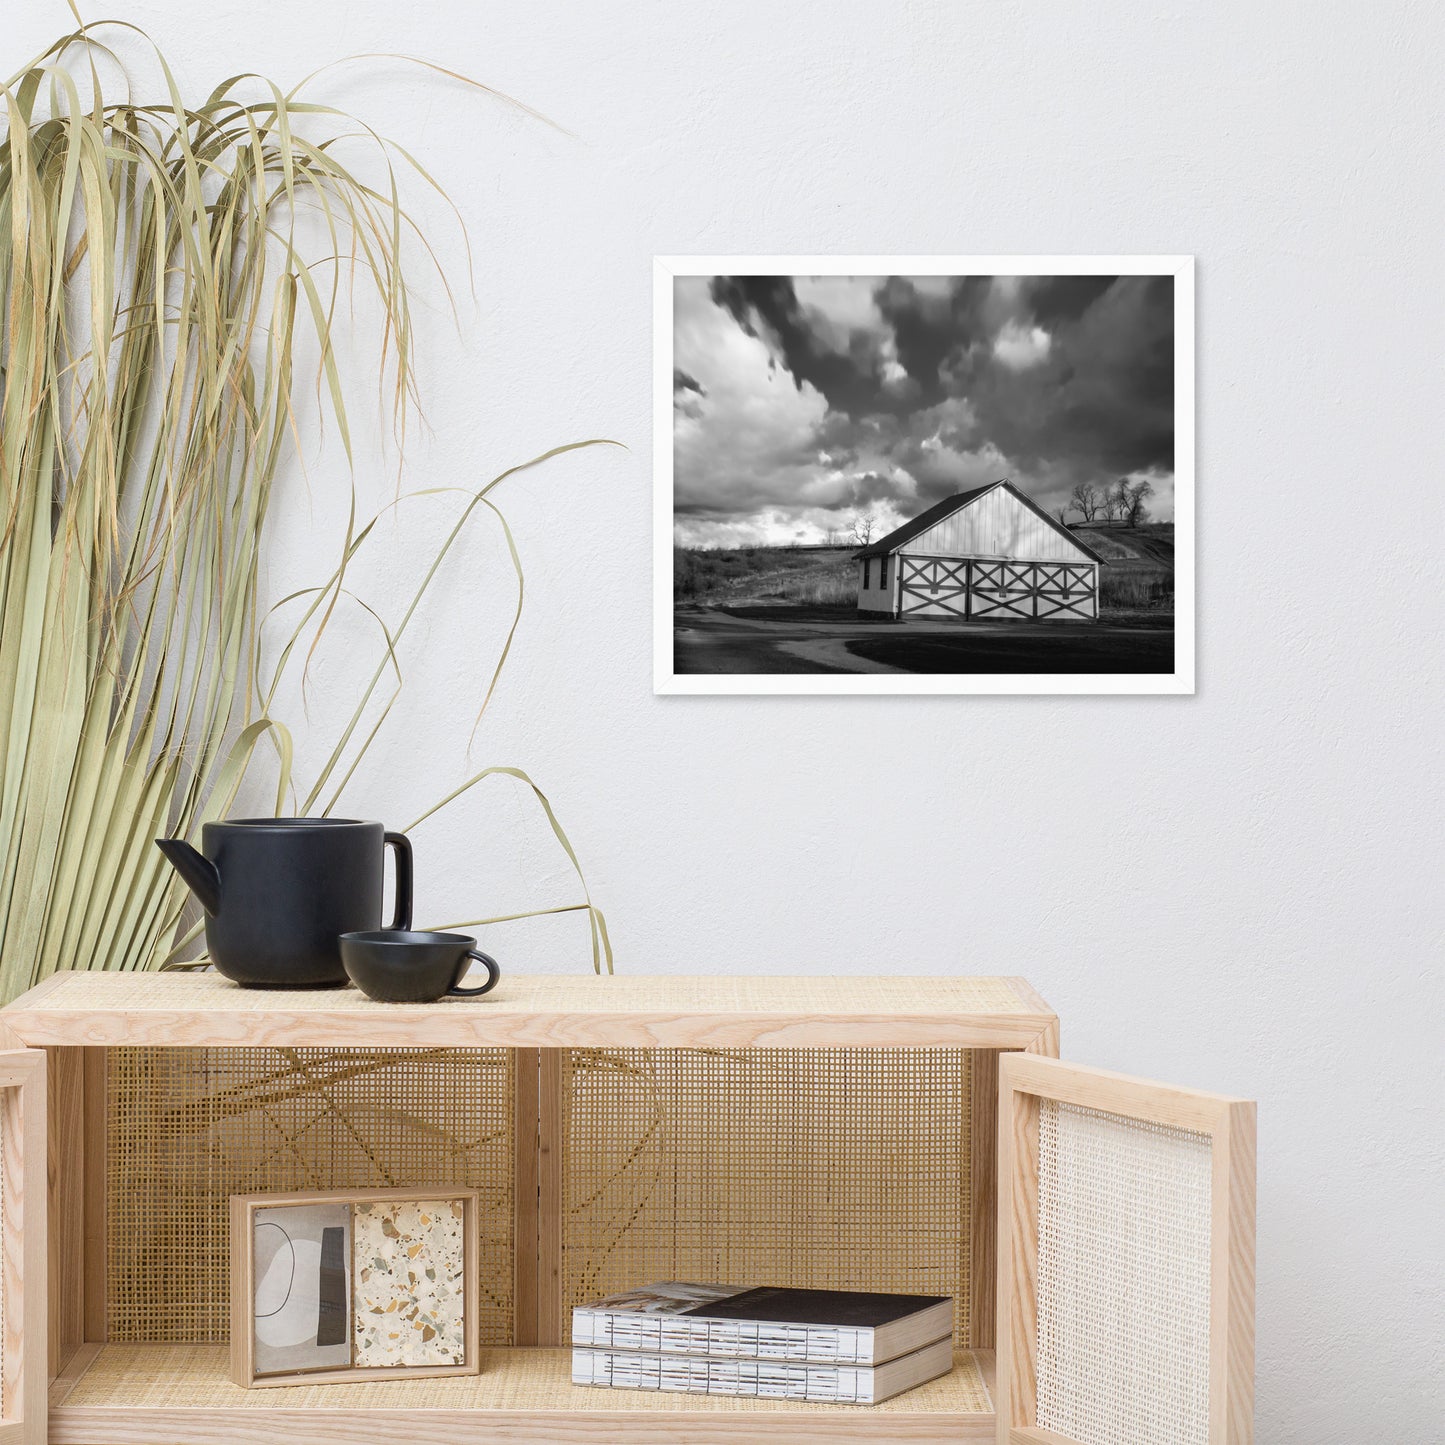 Elegant Bedroom Wall Decor: Aging Barn in the Morning Sun in Black and White - Rural / Country Style Landscape / Nature Photograph  Framed Wall Art Print - Wall Decor - Artwork